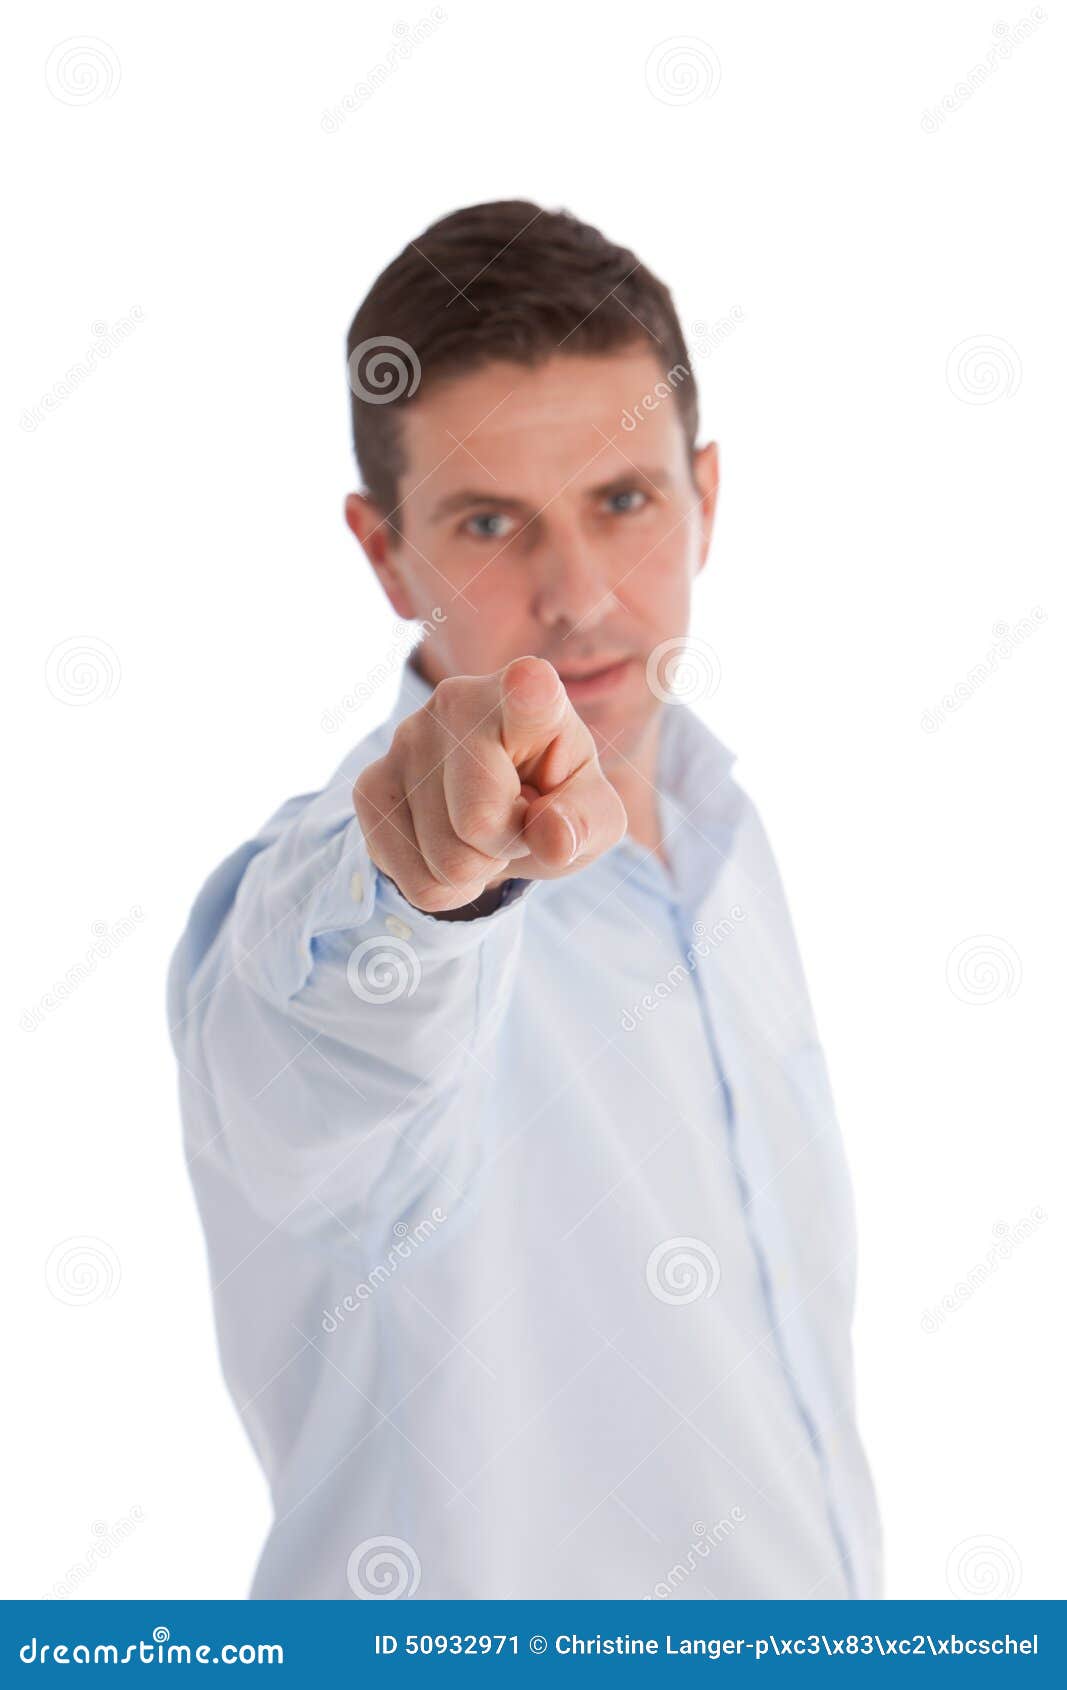 Businessman Pointing His Finger at the Camera Stock Image - Image of ...